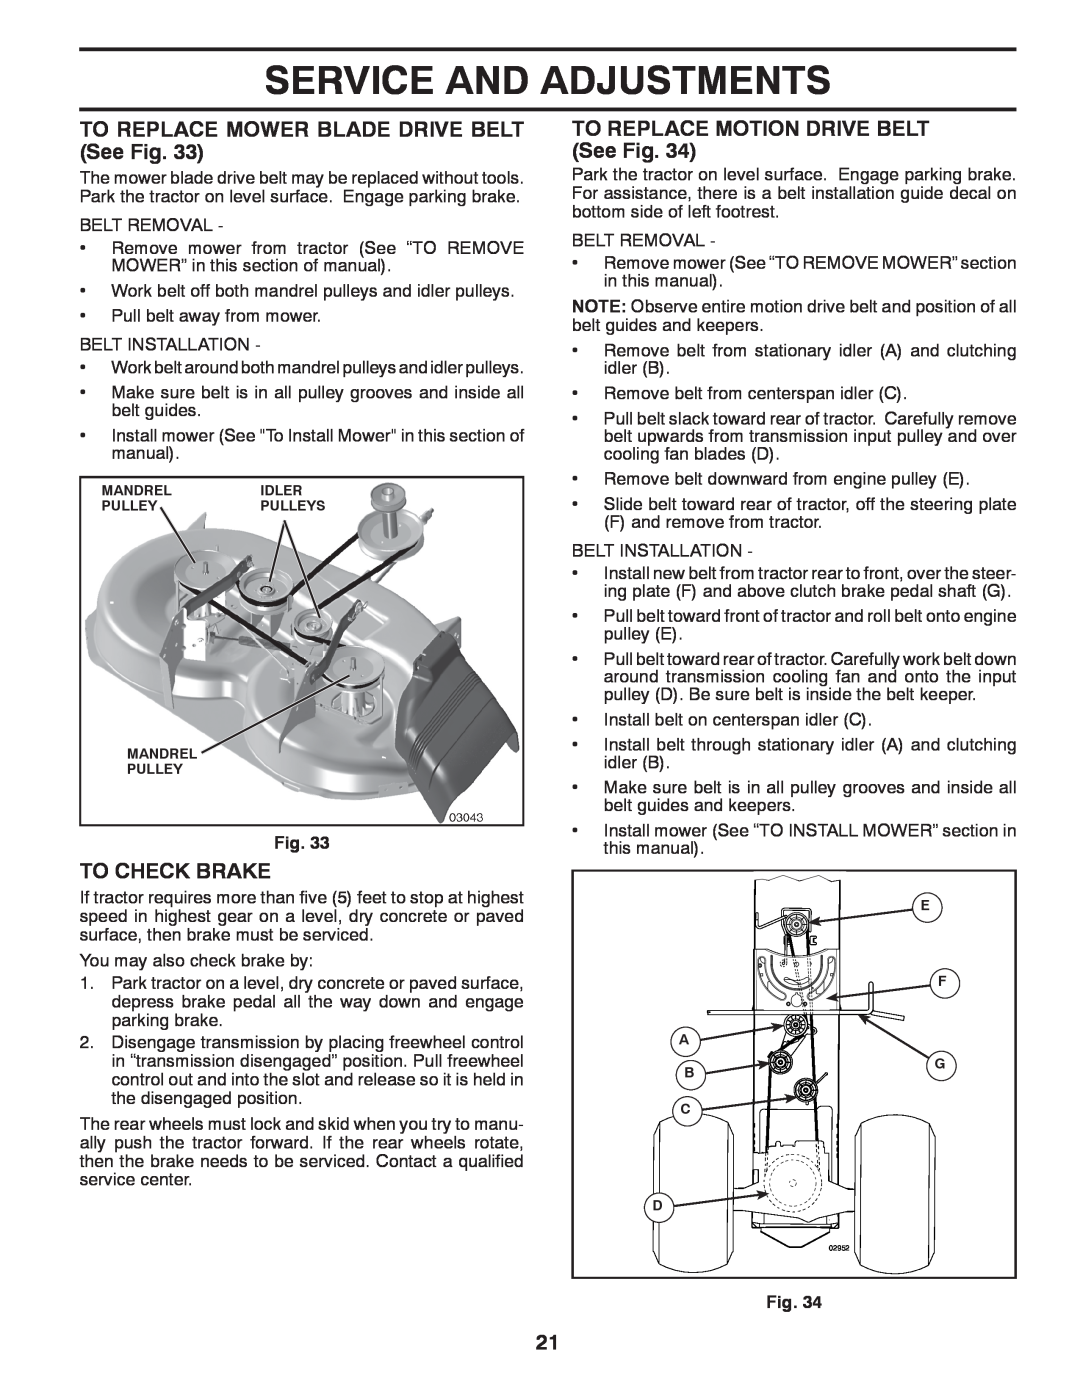 Poulan 34-80, 96042010703 manual Service And Adjustments, TO REPLACE MOWER BLADE DRIVE BELT See Fig, To Check Brake 